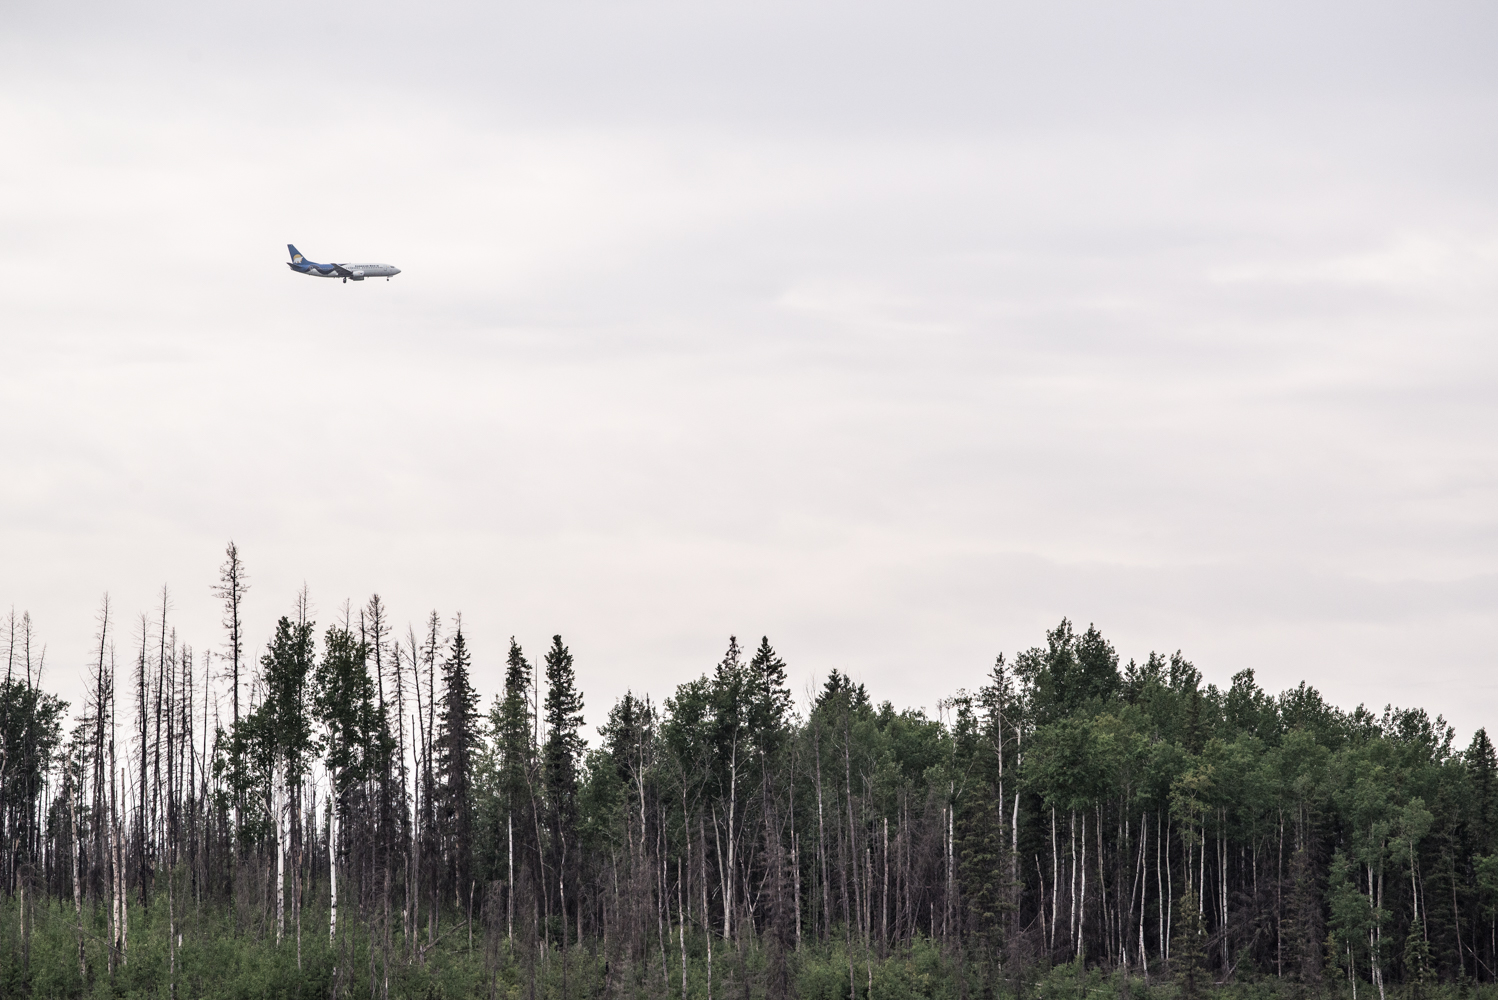  Airplane approaching the Canadian Natural Resources Limited Horizon Mine, July 2017.  